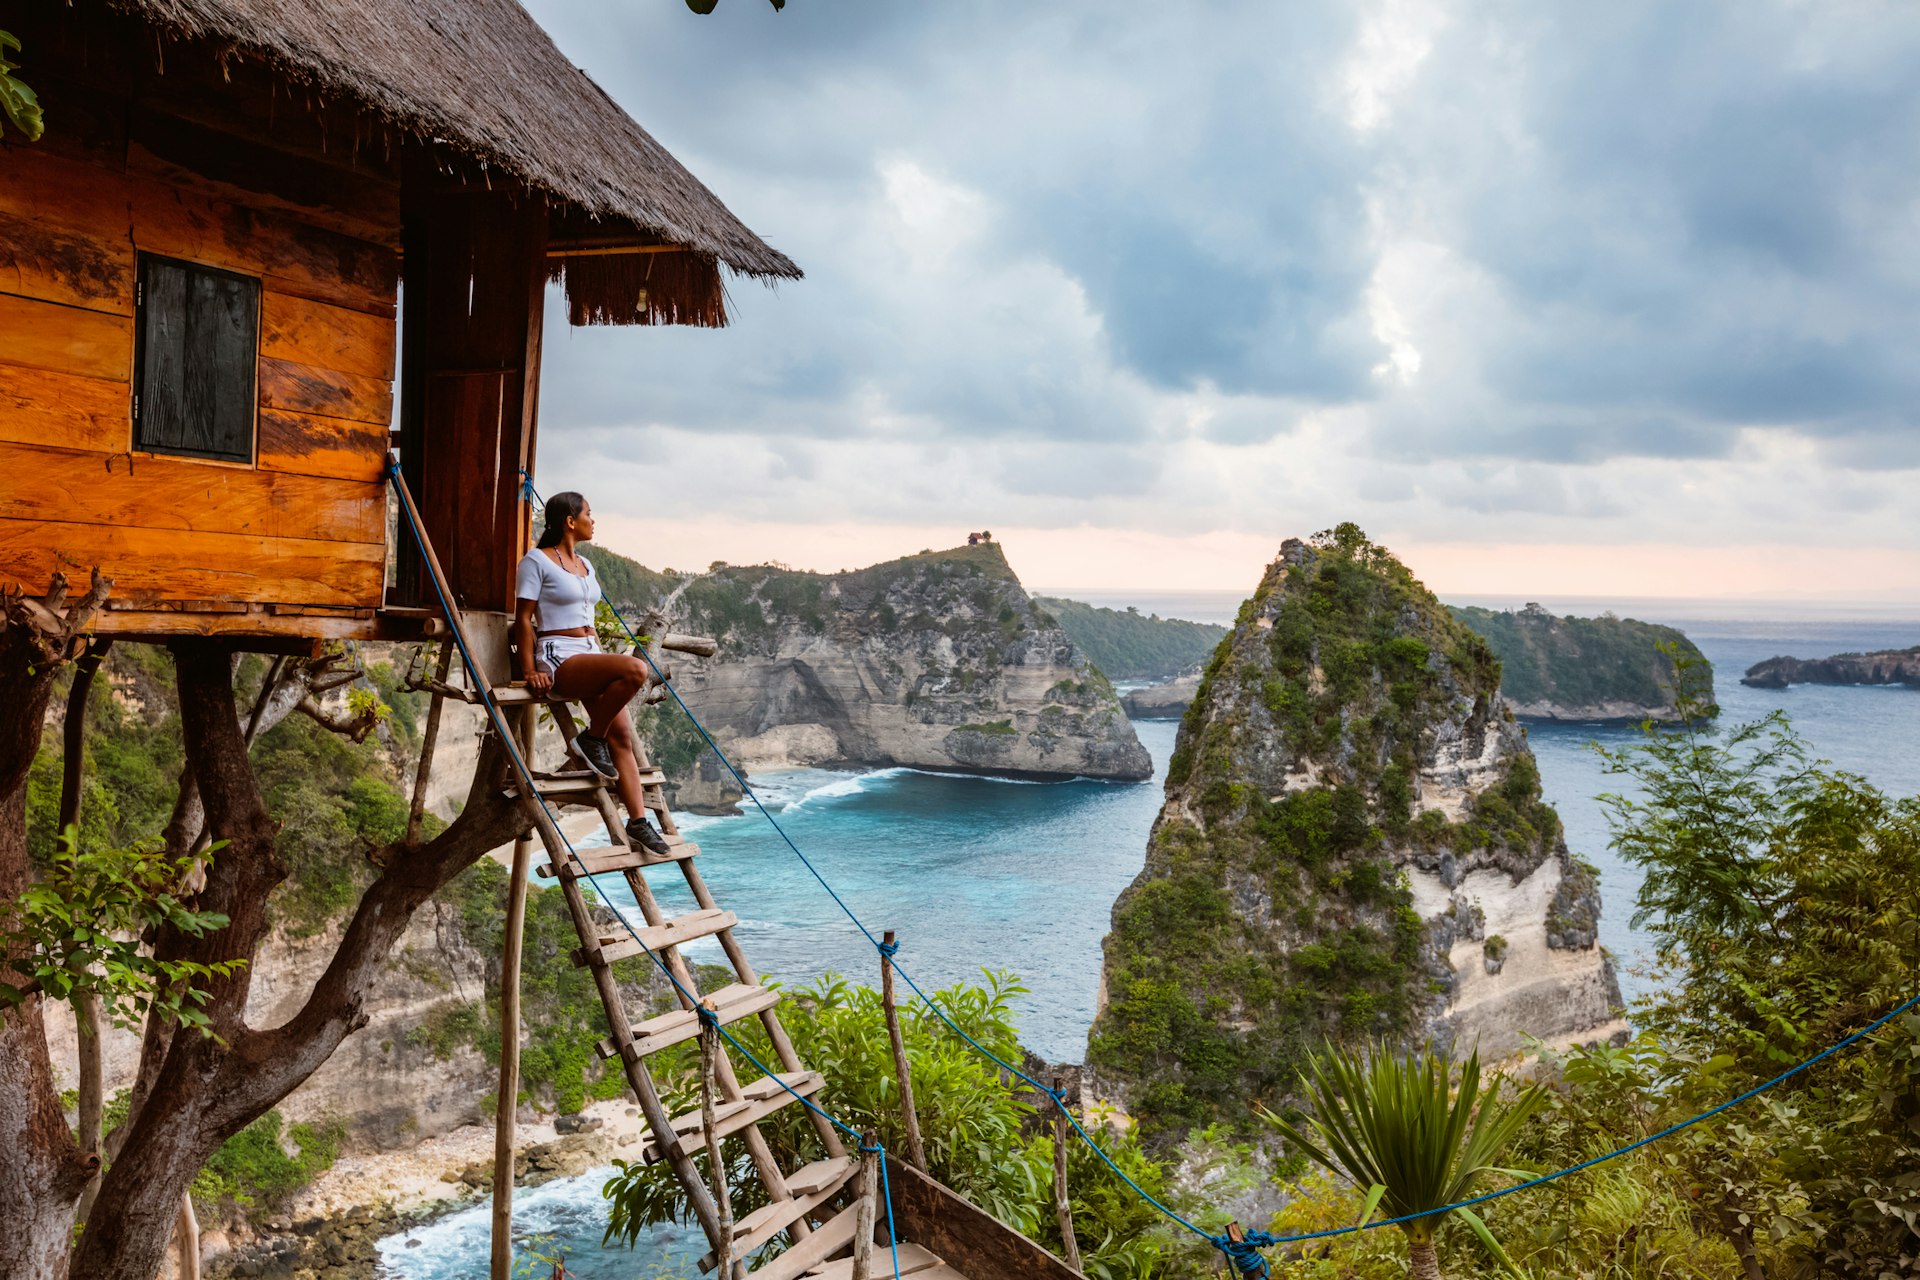 A solo woman sits at the top of a ladder leading up to a treehouse overlooking a bay with several rocky islets